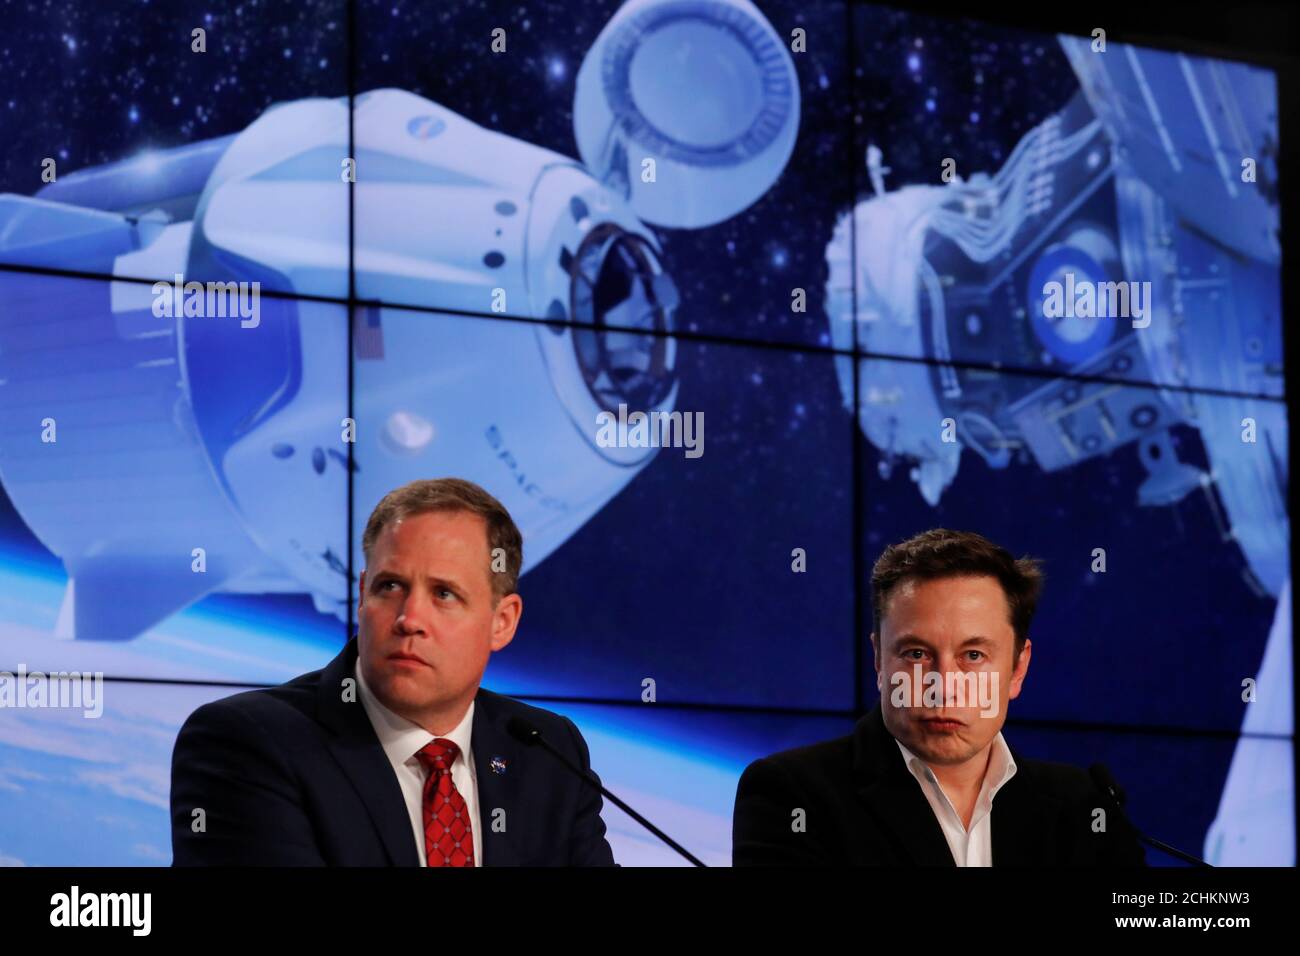 Administrator of NASA Jim Bridenstine and SpaceX founder Elon Musk listen to a question at a post-launch news conference after the SpaceX Falcon 9 rocket, carrying the Crew Dragon spacecraft, lifted off on an uncrewed test flight to the International Space Station from the Kennedy Space Center in Cape Canaveral, Florida, U.S., March 2, 2019. REUTERS/Mike Blake Stock Photo